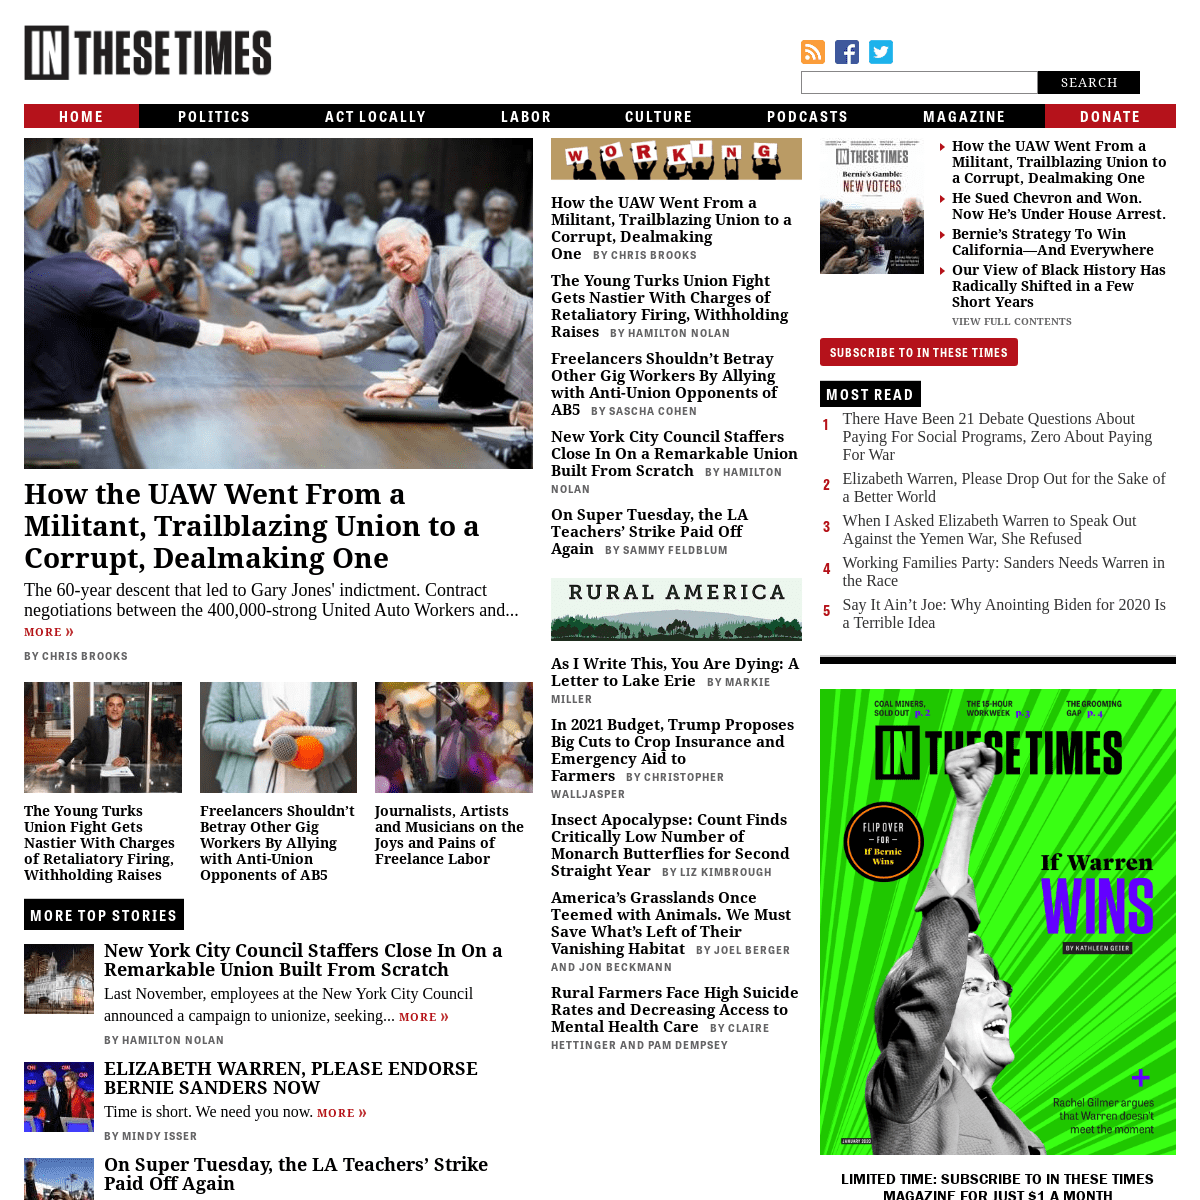 A complete backup of inthesetimes.com